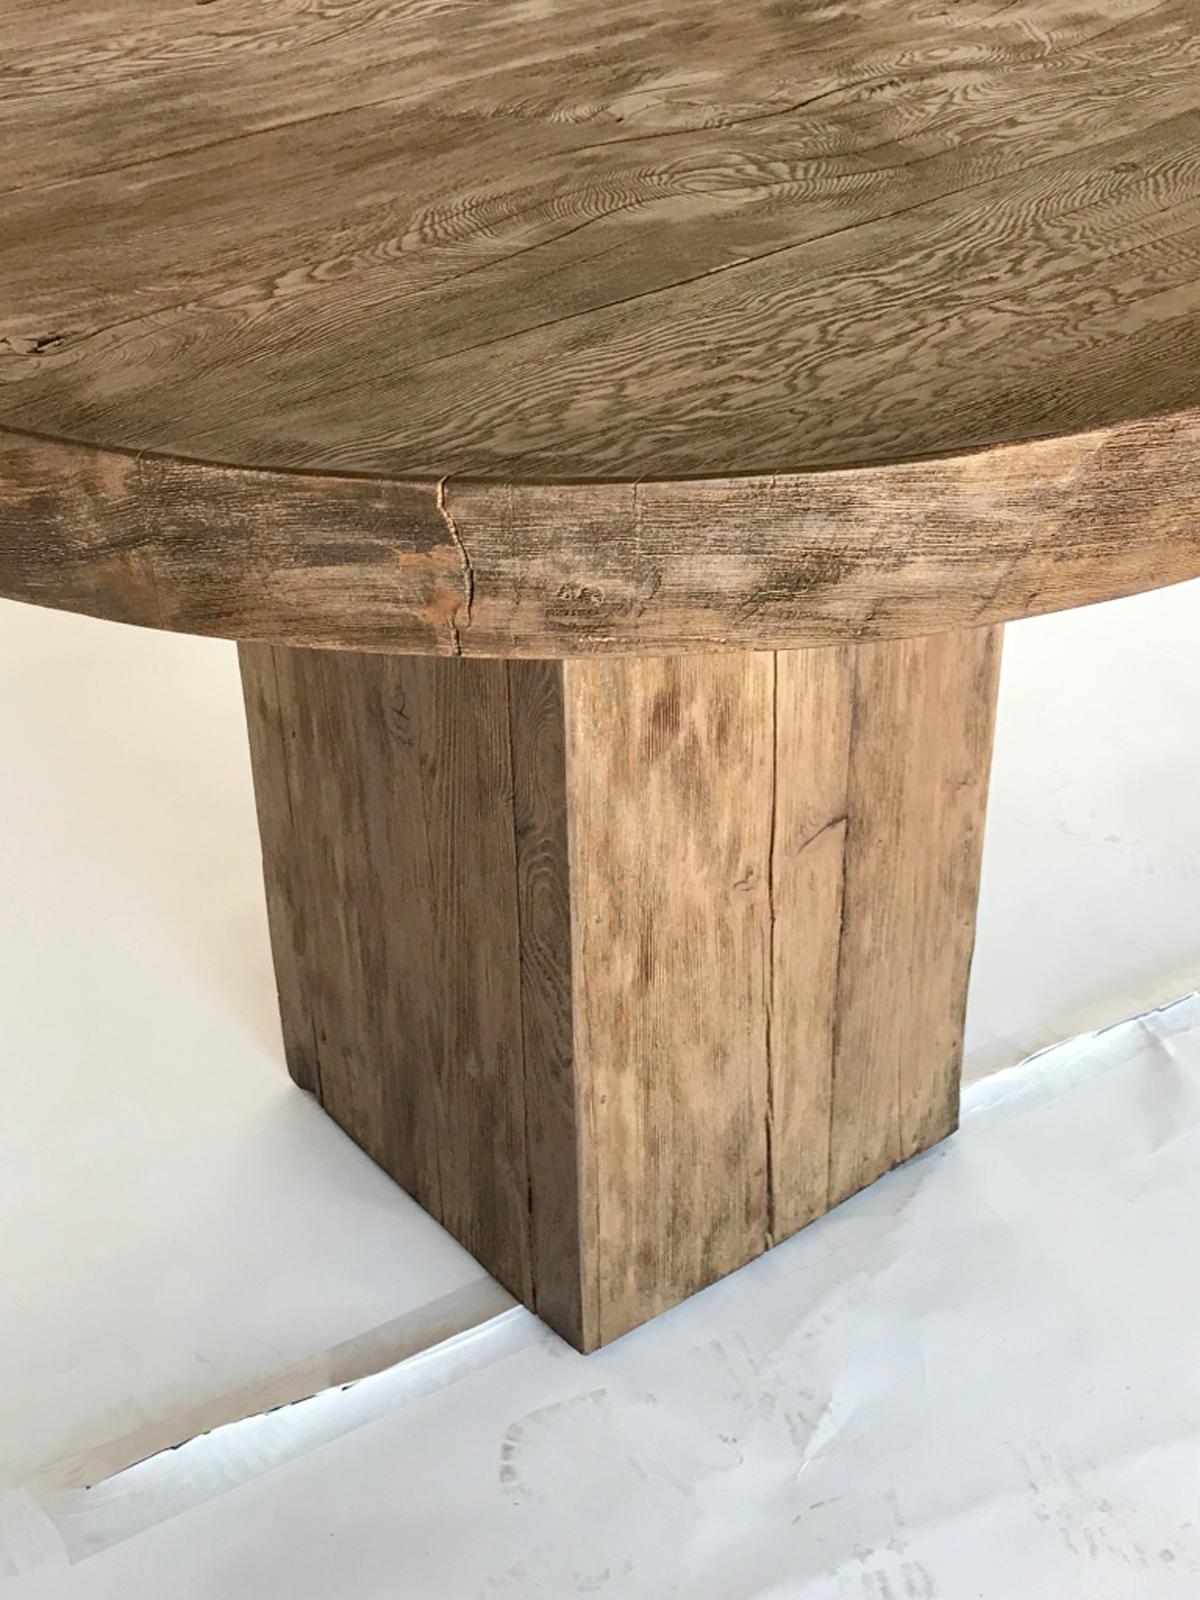 Rustic modern, with simple lines, center table, game table or small dining table. Fits four chairs comfortably.
Made from reclaimed Douglas fir and finished in a durable dark latte, range of color.